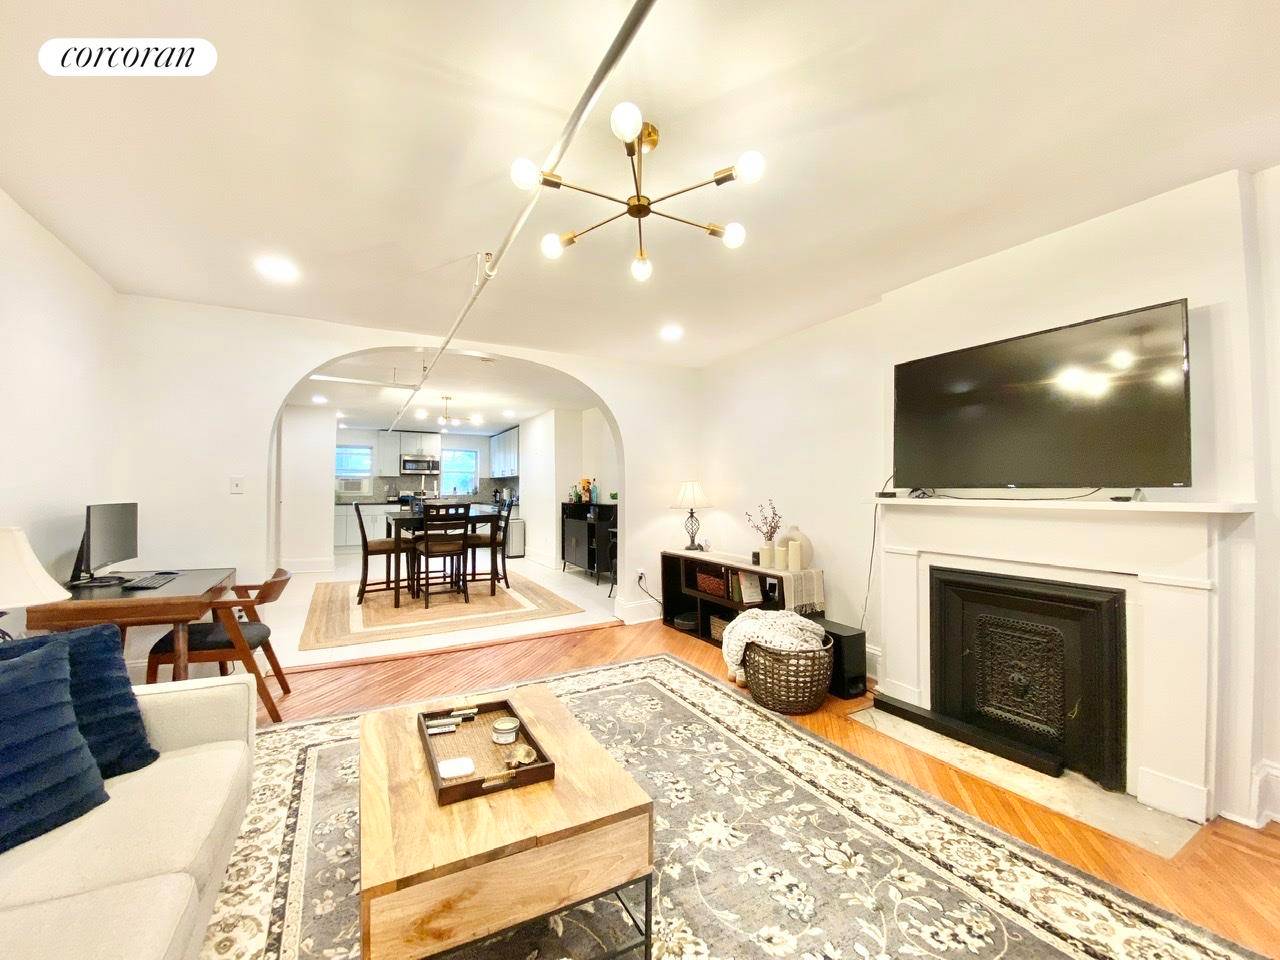 139 Gates Avenue Garden Parlor Duplex Located on a charming tree lined block in Clinton Hill, this 2, 200 square foot, convertible 3 bedroom 2 bath triplex encompasses the garden, ...